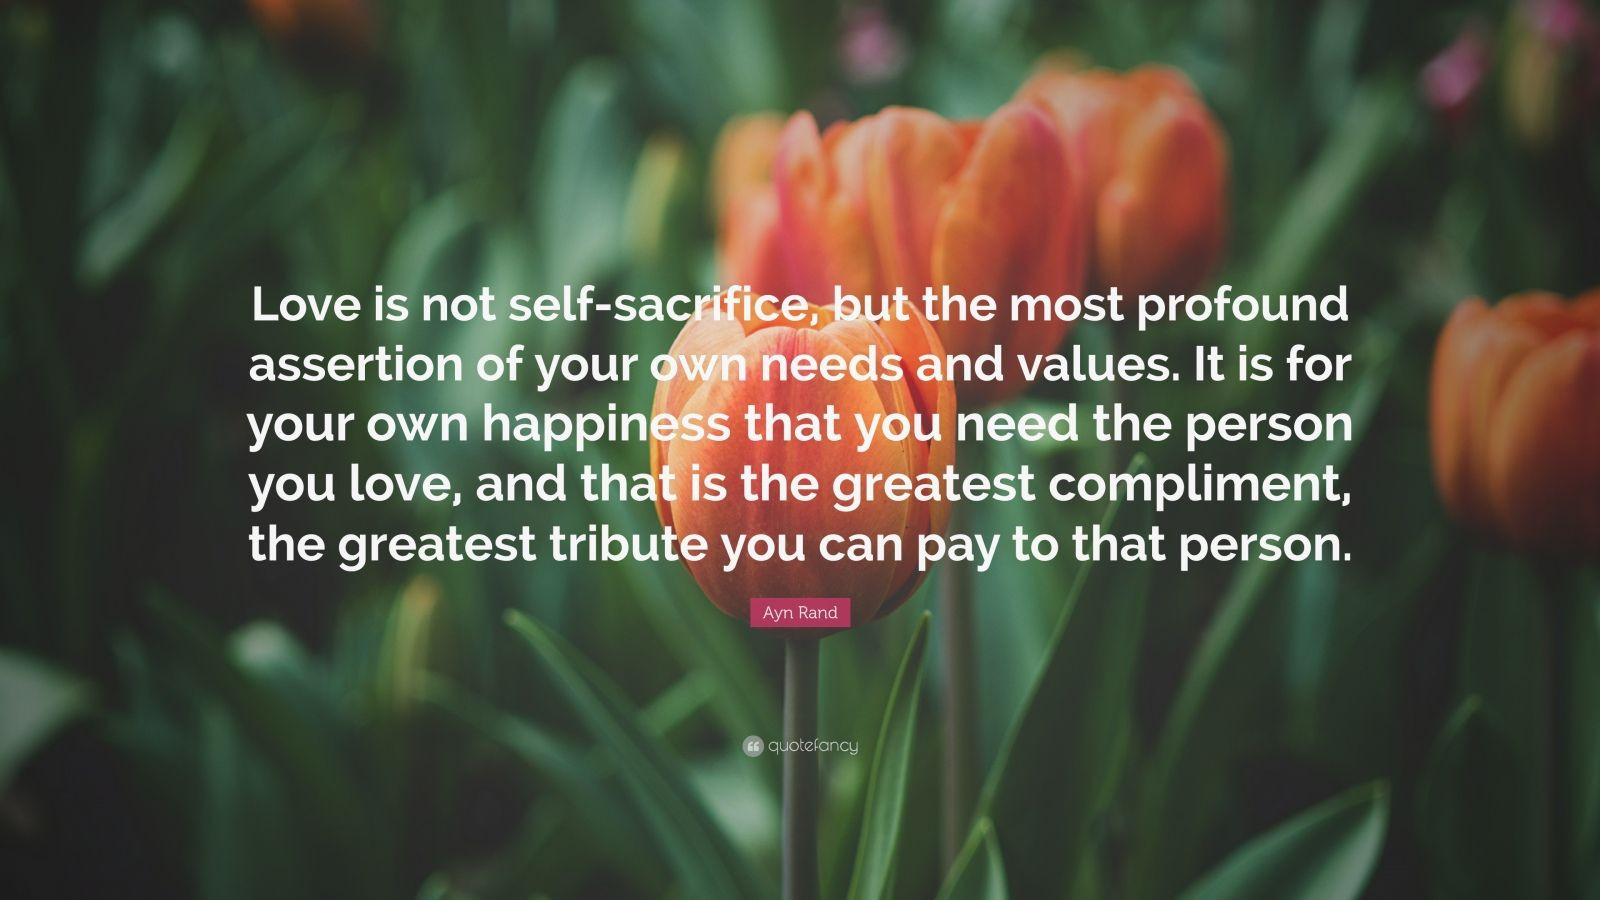 Ayn Rand Love Quotes
 Ayn Rand Quote “Love is not self sacrifice but the most